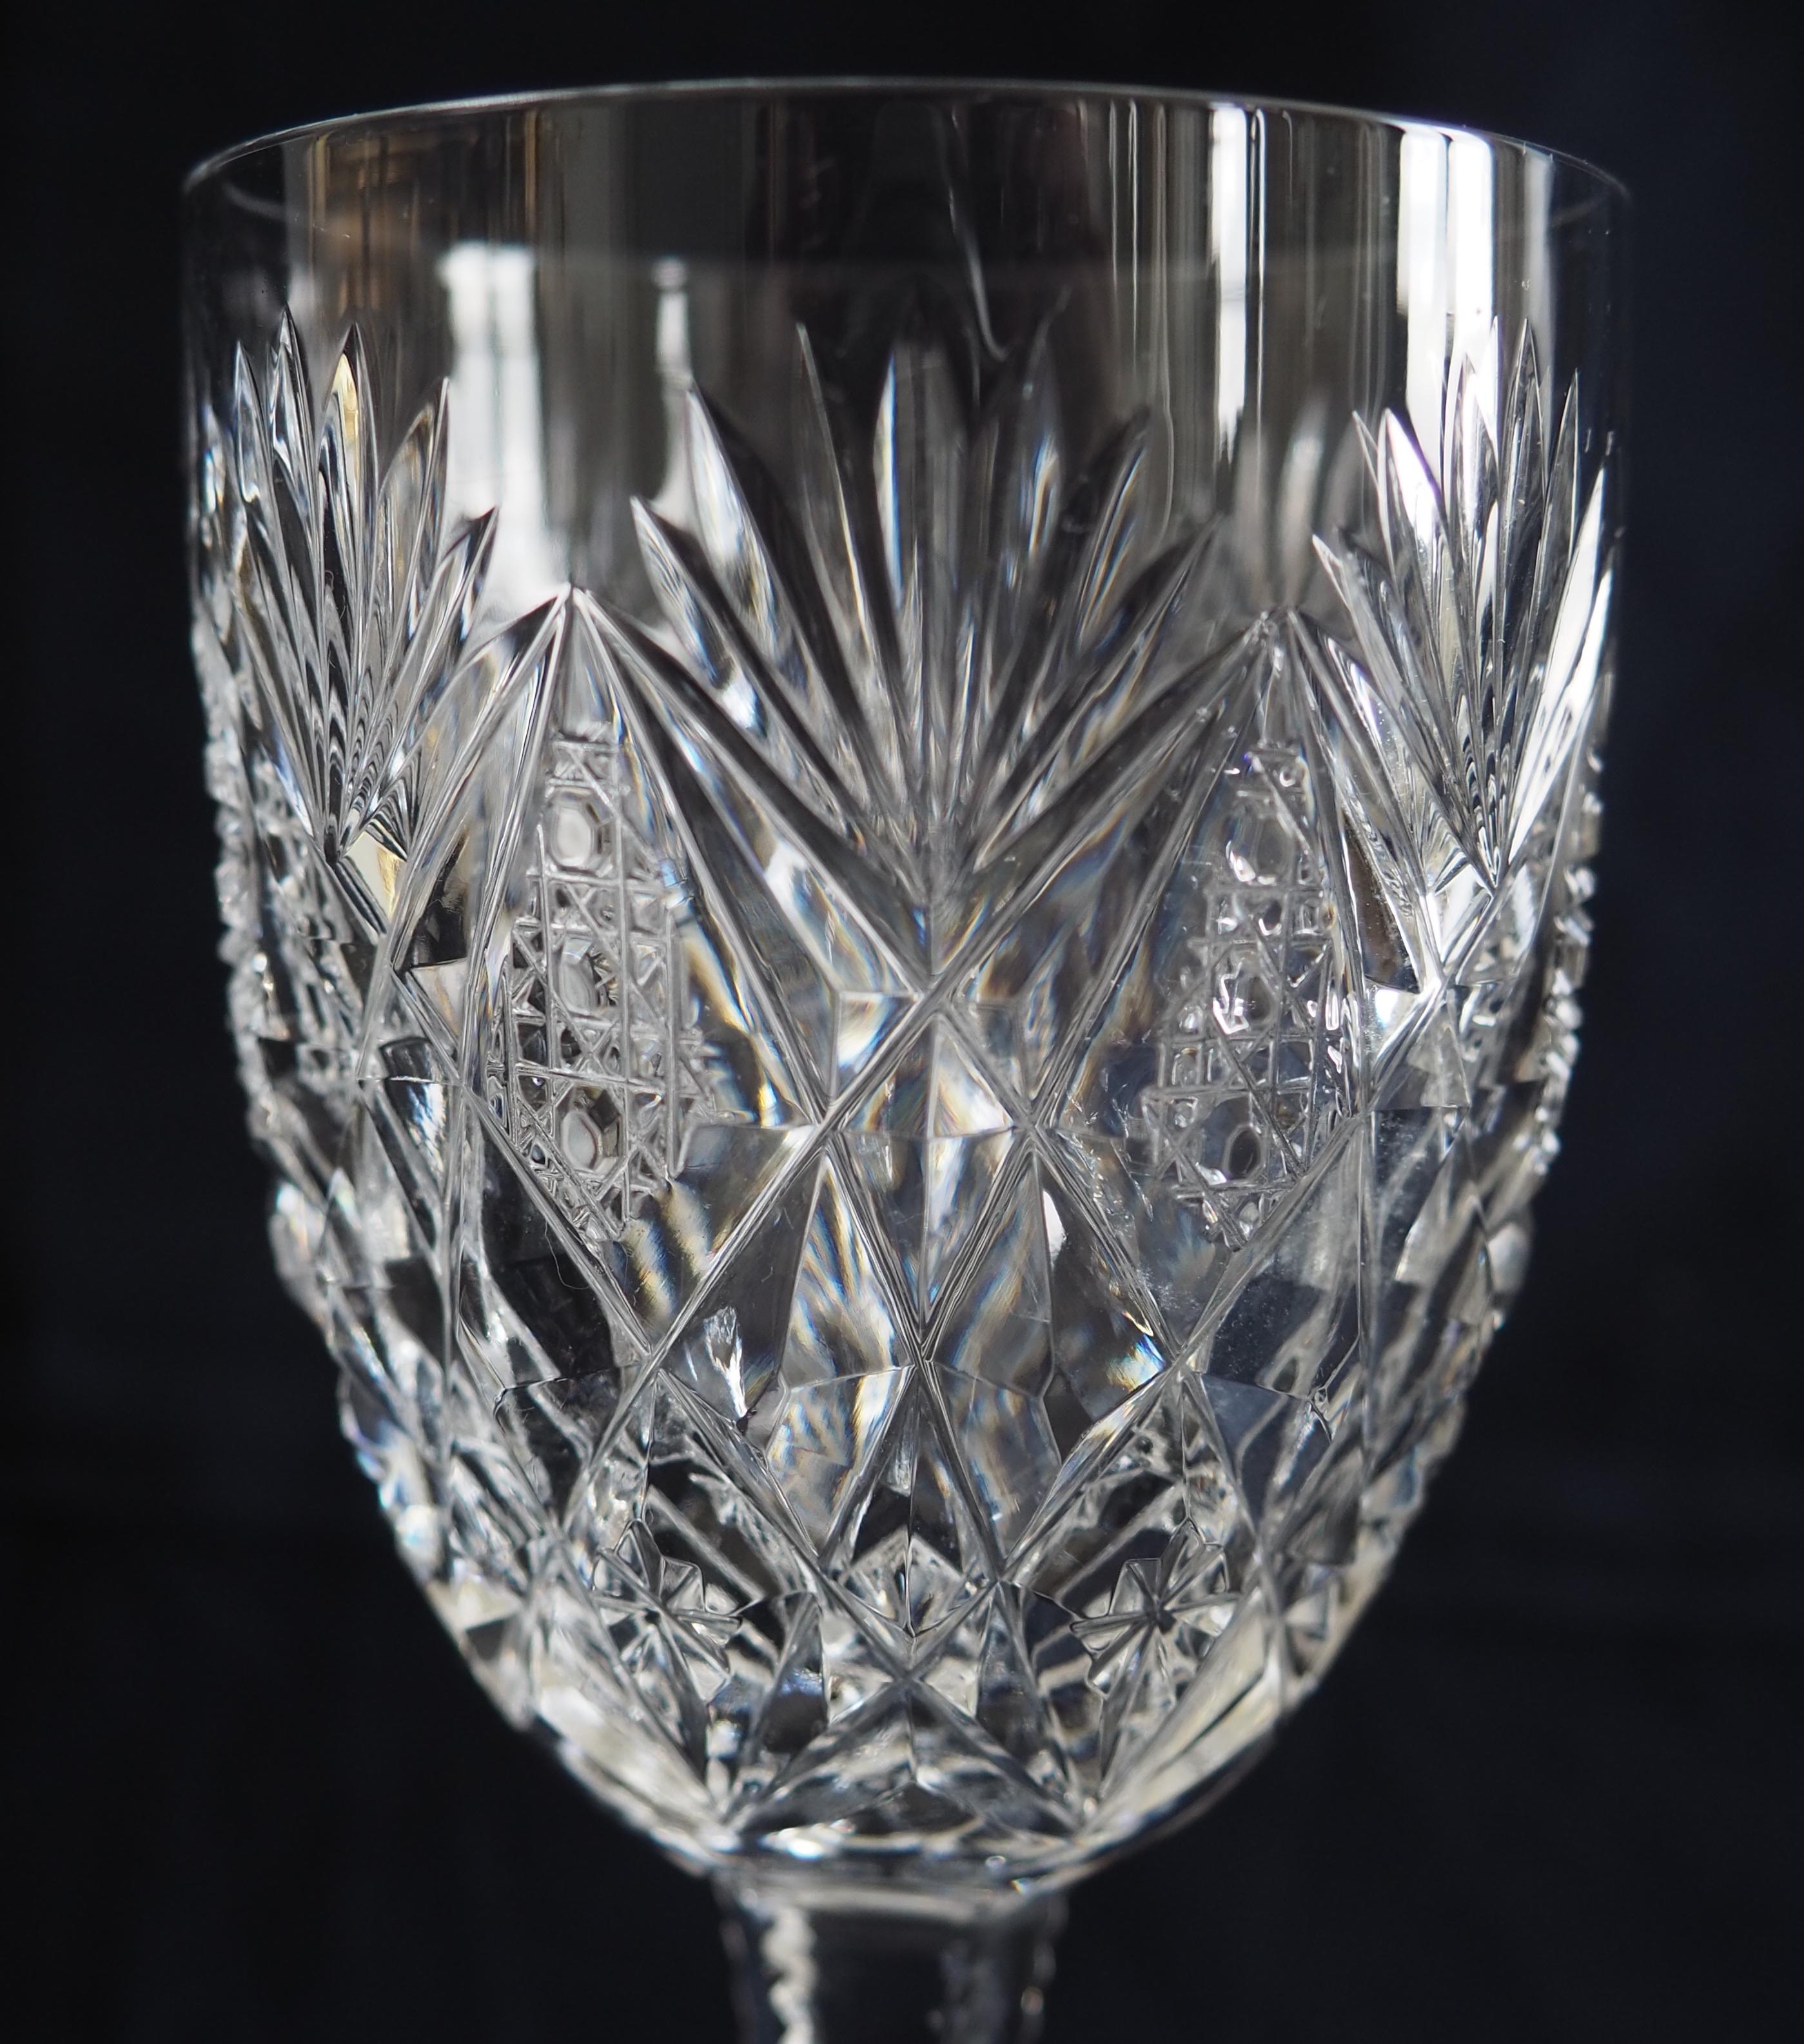 Crystal Set of 24 St Louis crystal glasses (6*4), Florence pattern - signed - 6 guests